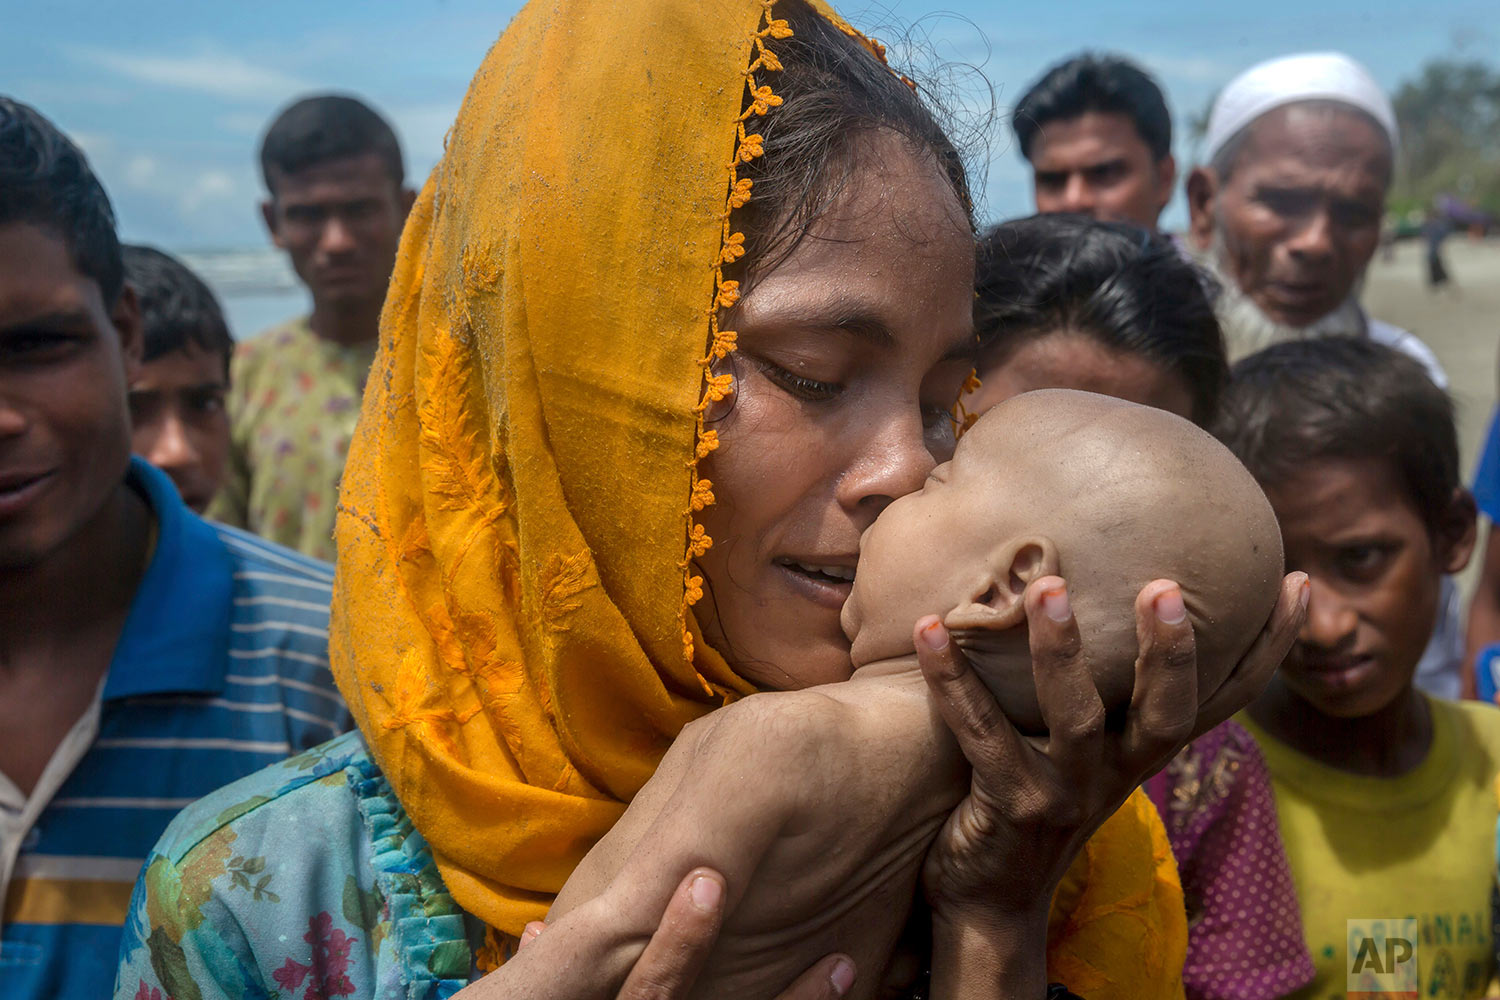 A Rohingya Muslim woman Hanida Begum, who crossed over from Myanmar into Bangladesh, kisses her infant son Abdul Masood who died when the boat they were traveling in capsized just before reaching the shore of the Bay of Bengal, in Shah Porir Dwip, Bangladesh, Thursday, Sept. 14, 2017. (AP Photo/Dar Yasin)